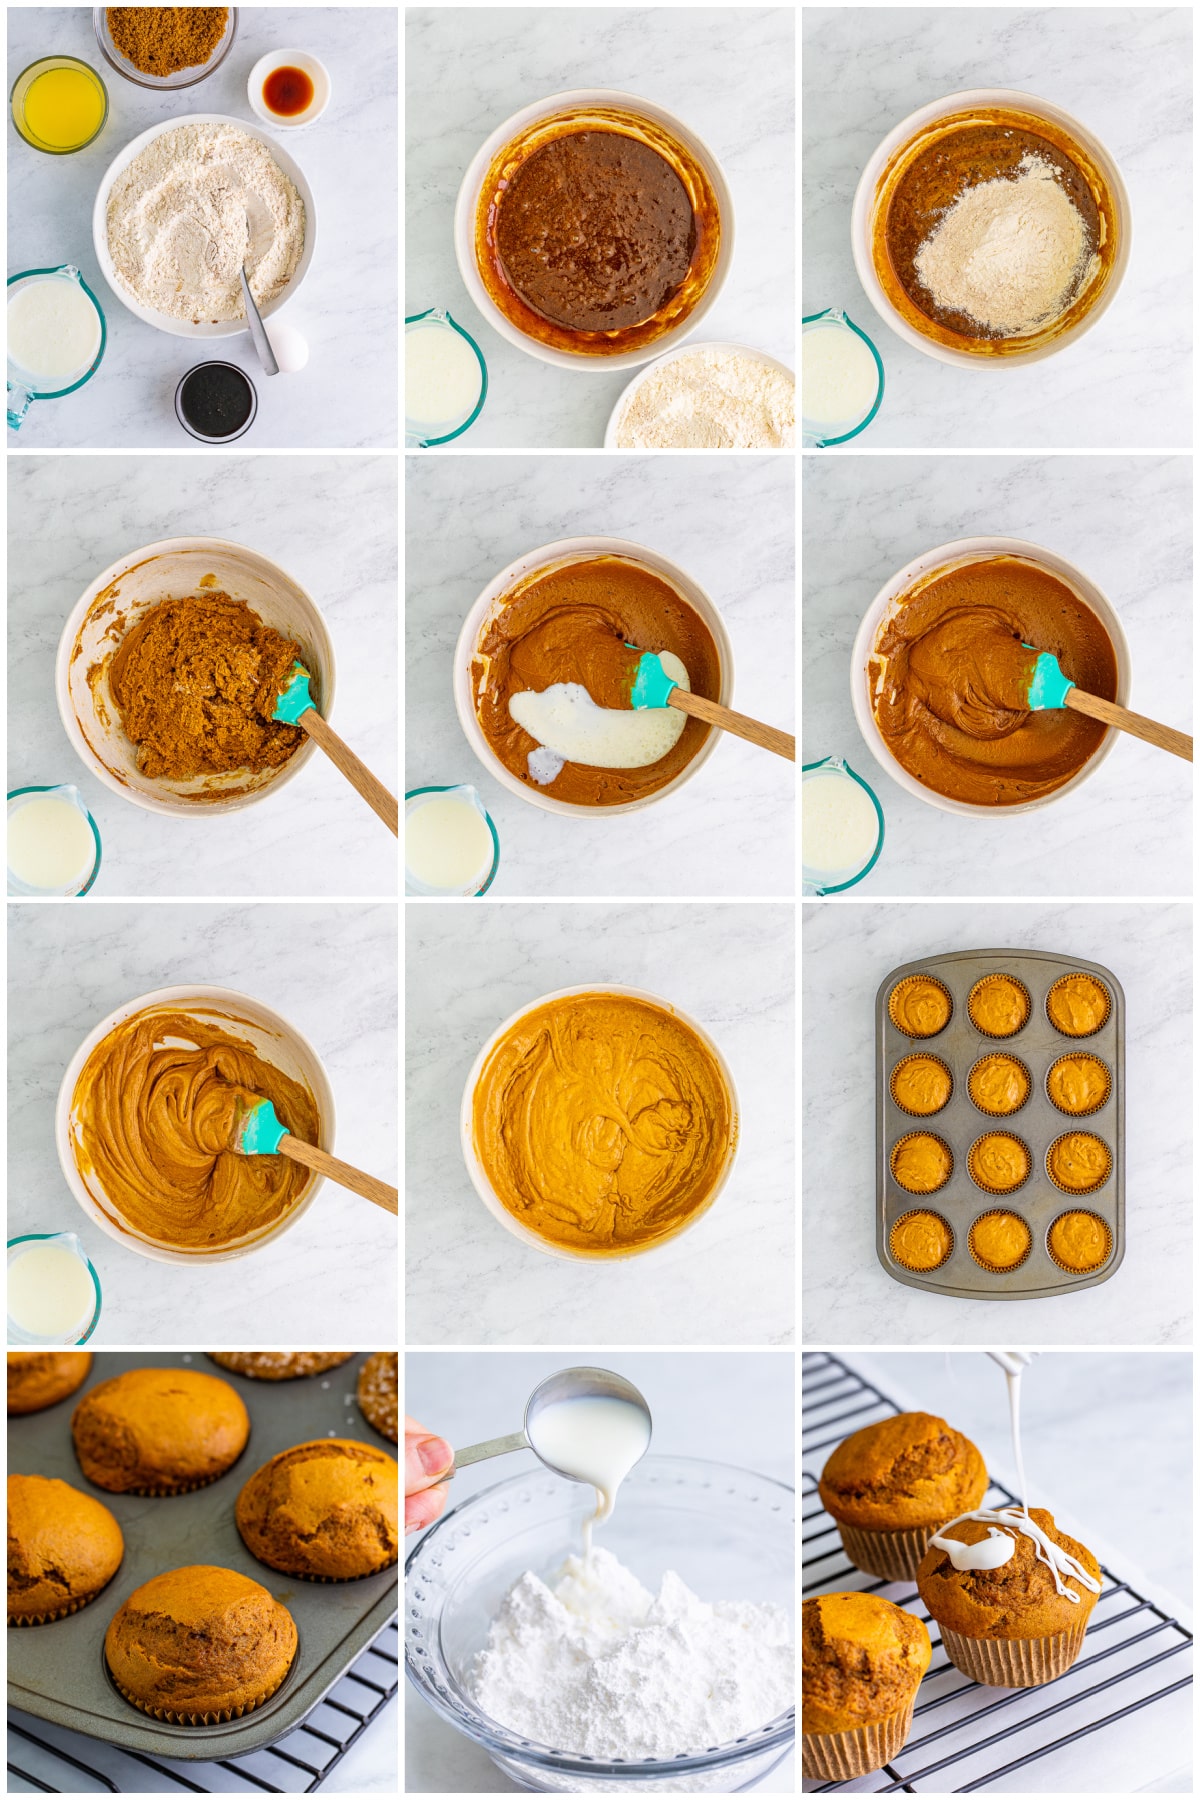 Step by step photos on how to make Gingerbread Muffins.